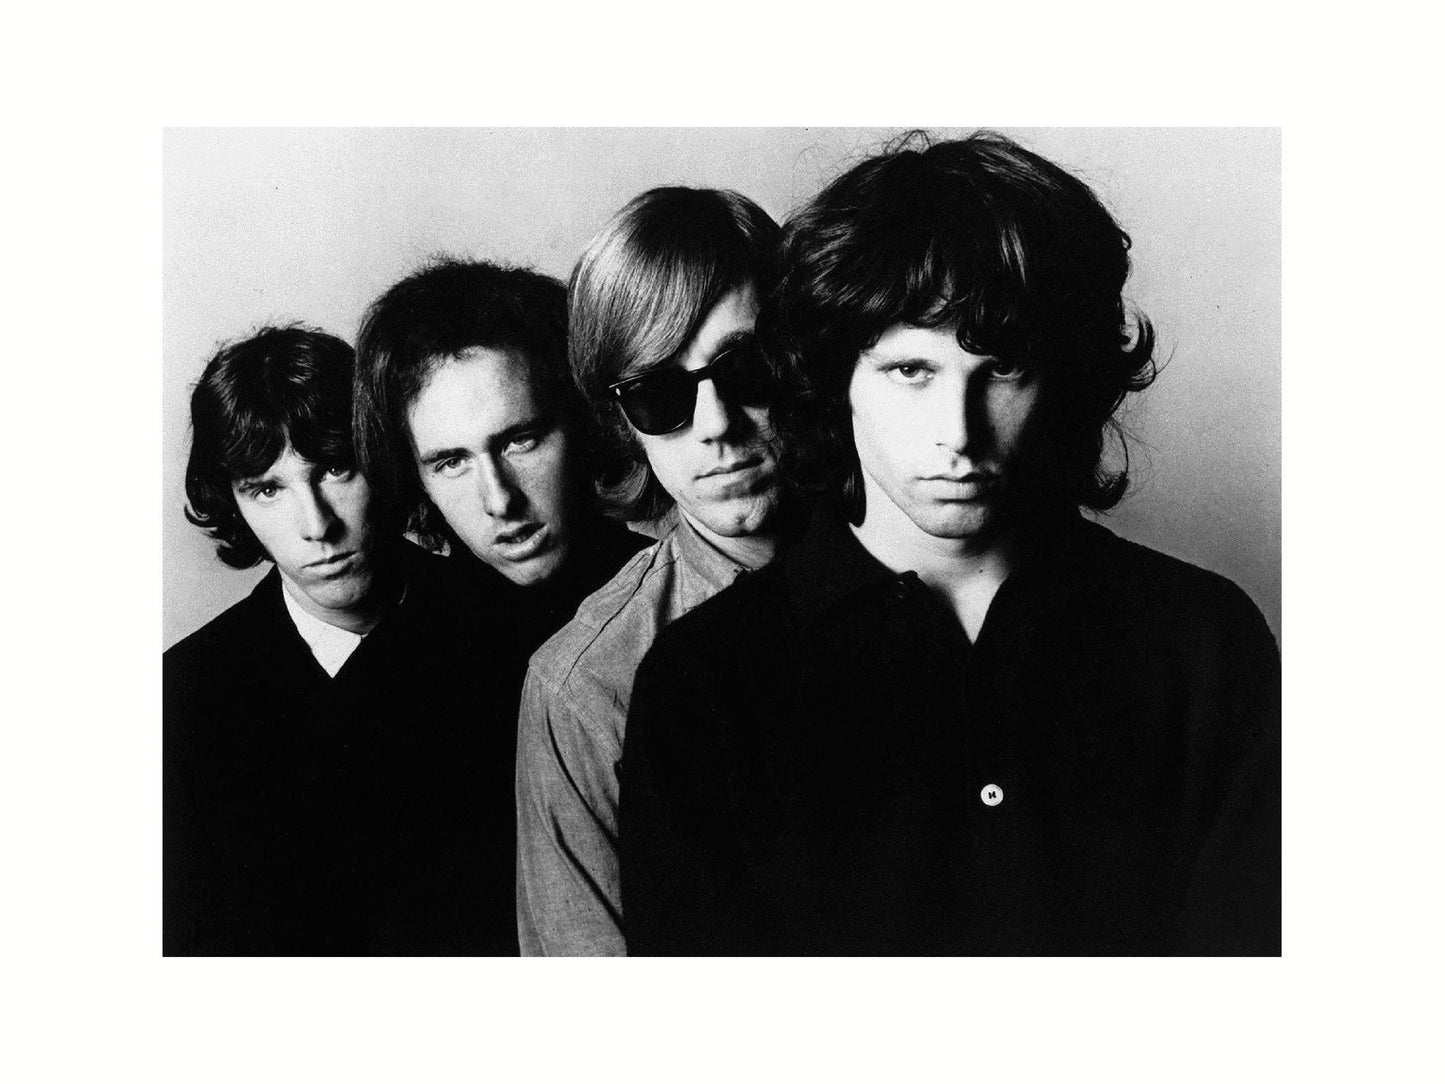 The Doors - Black and White Band Portrait, USA, Print (2/2)